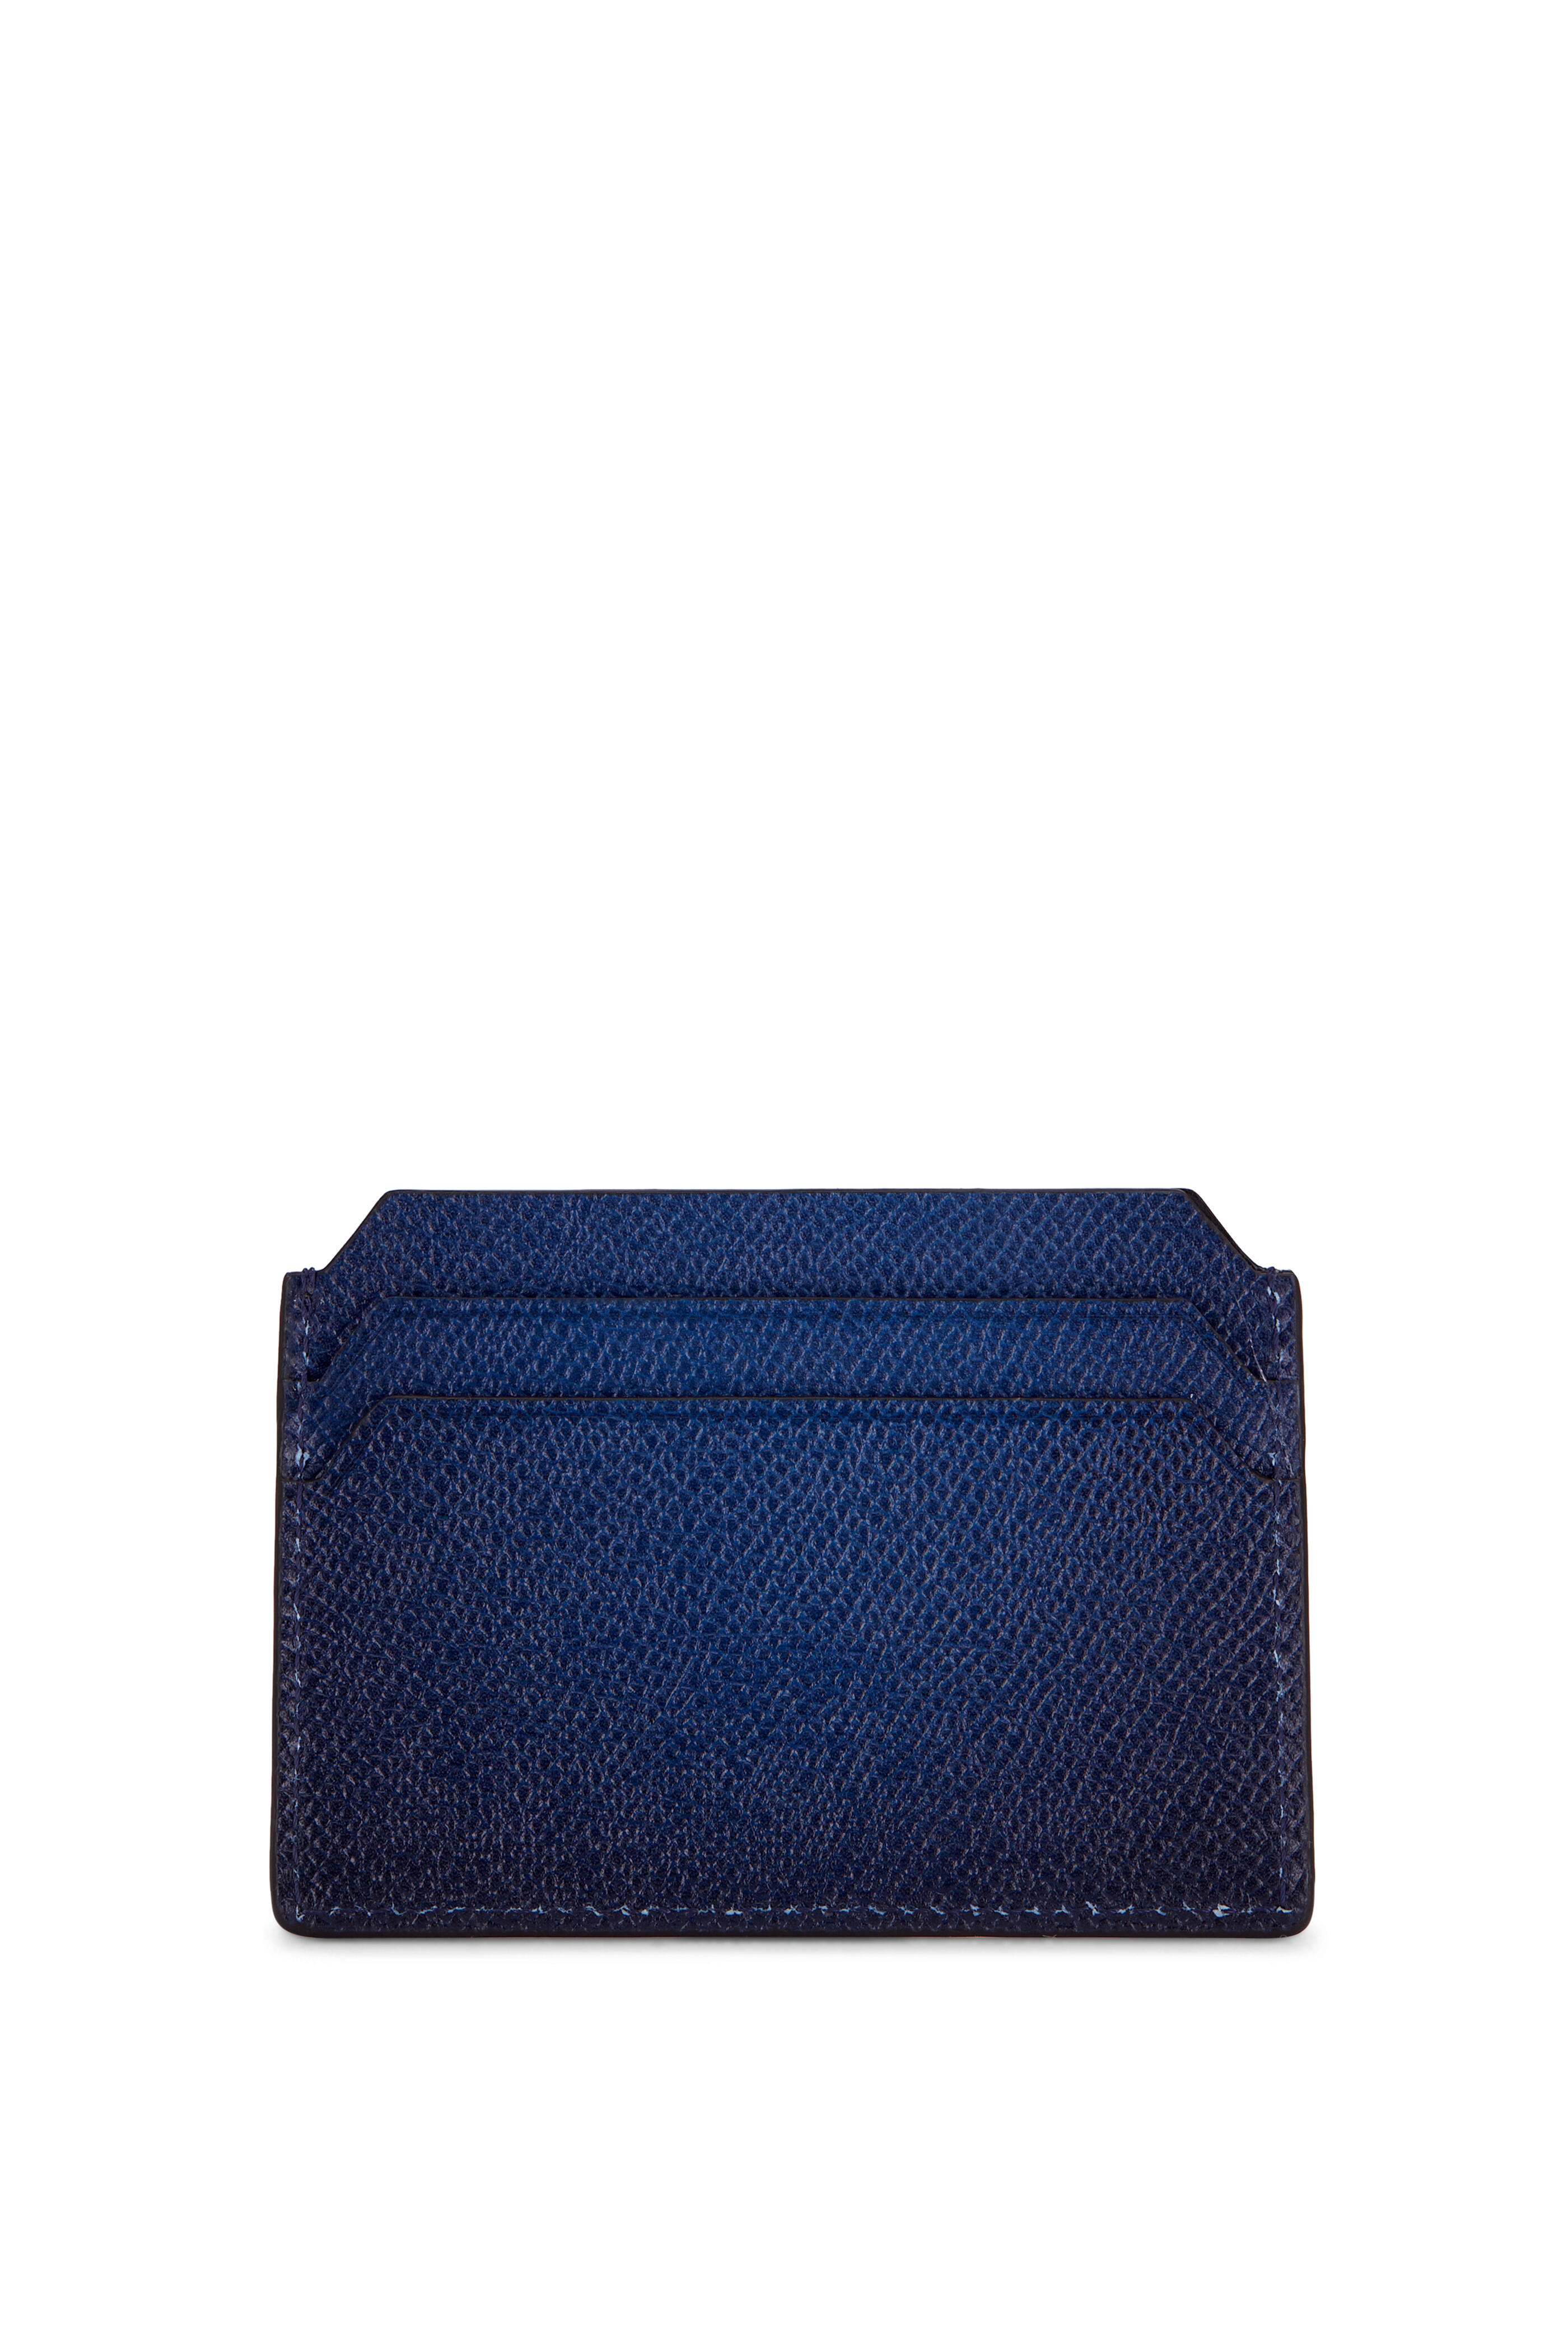 Santoni - Blue Leather Card Case | Mitchell Stores